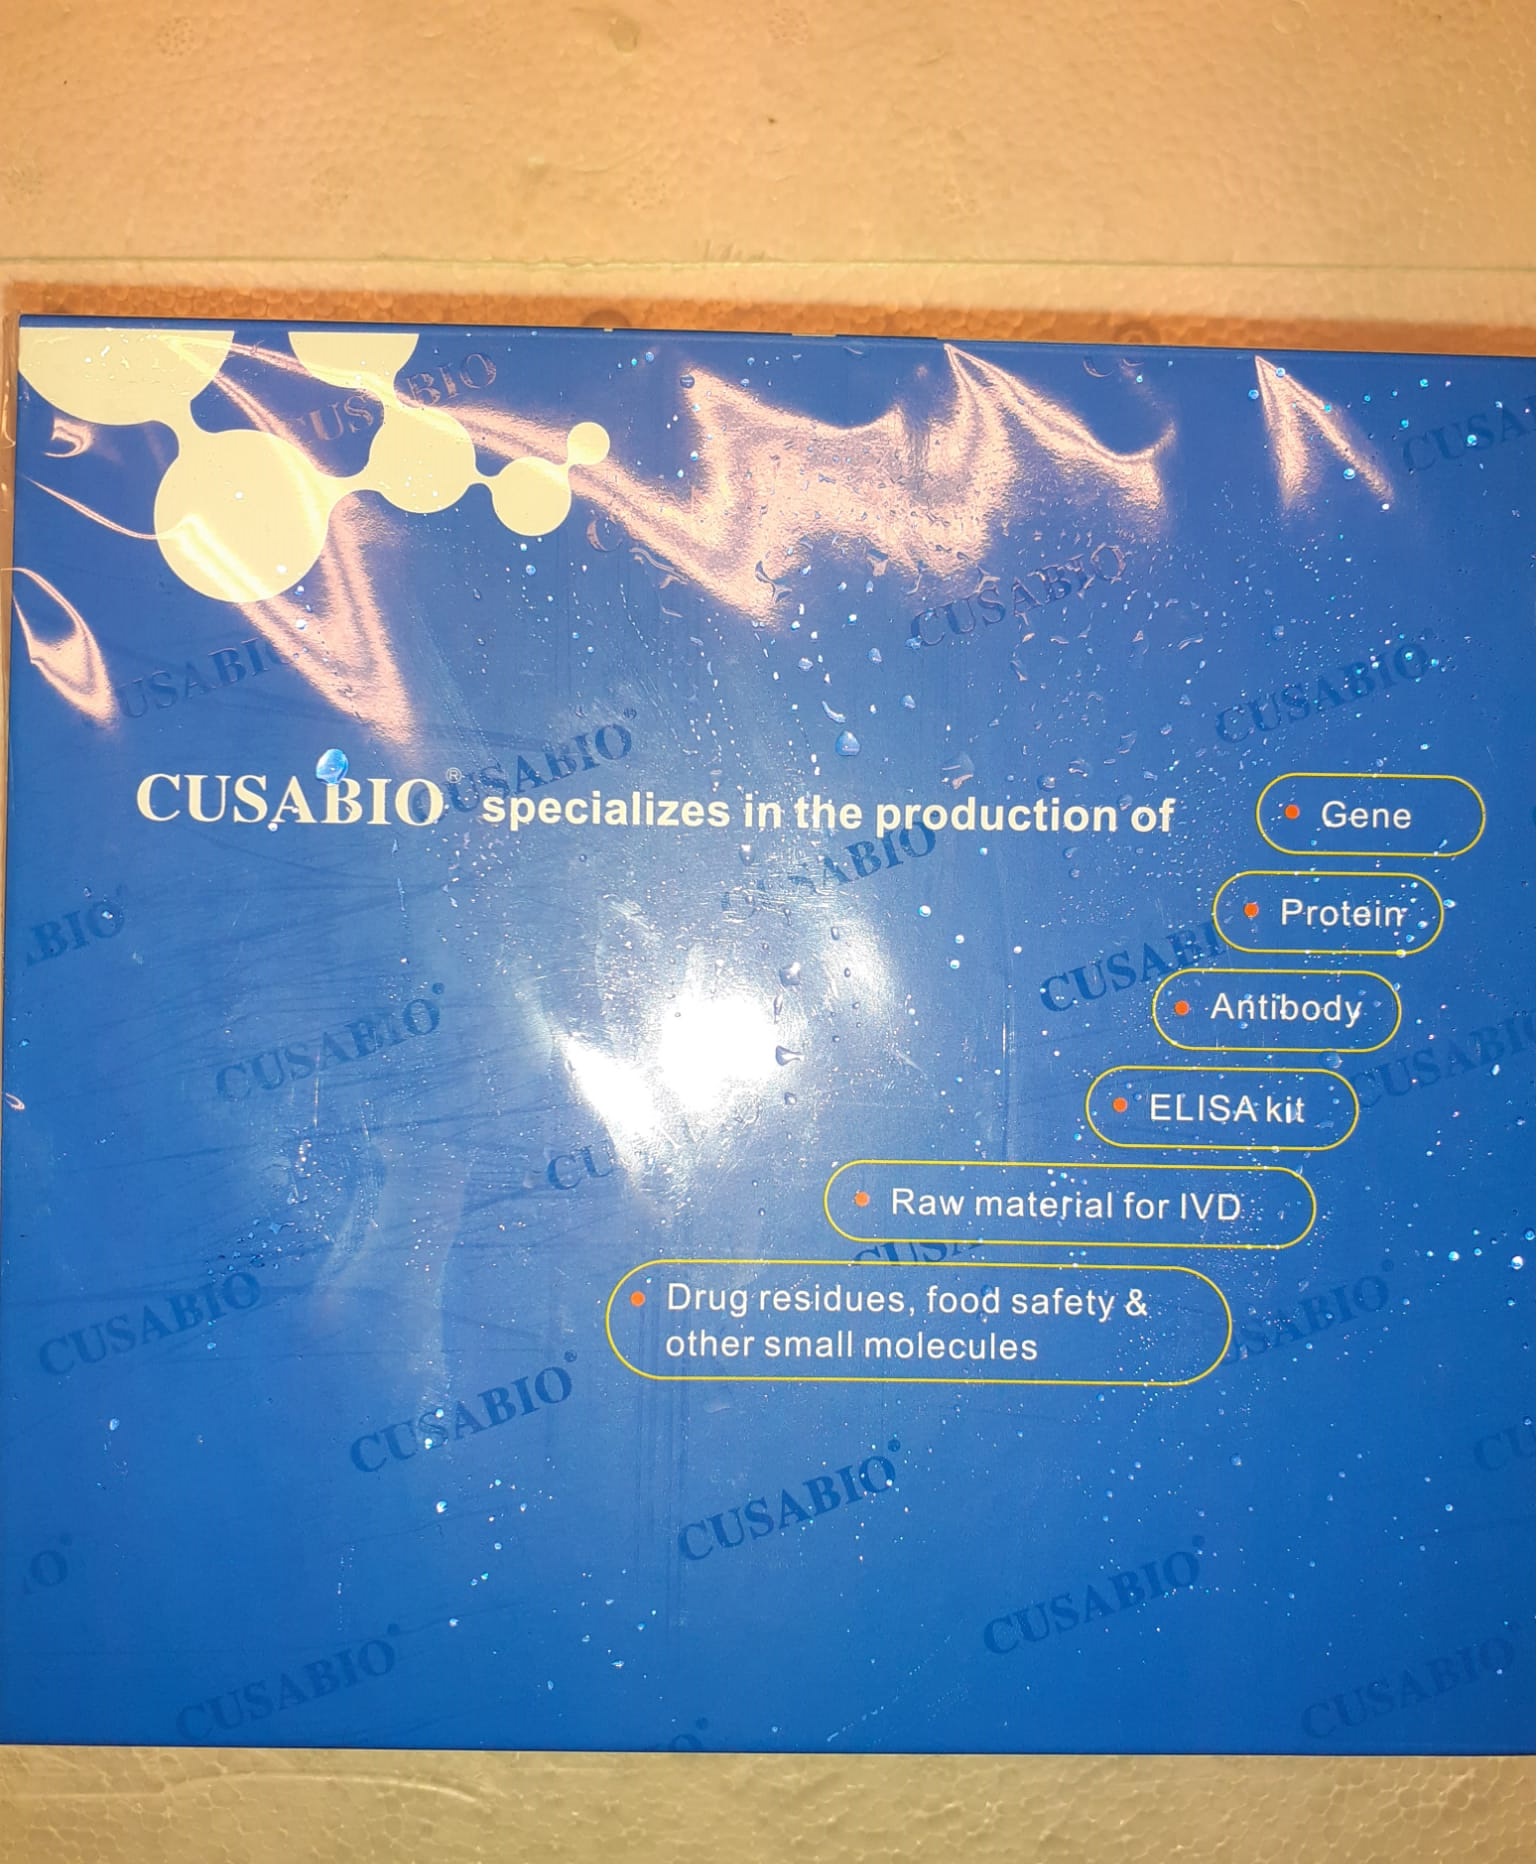 cusabio specializes in the production of antibody